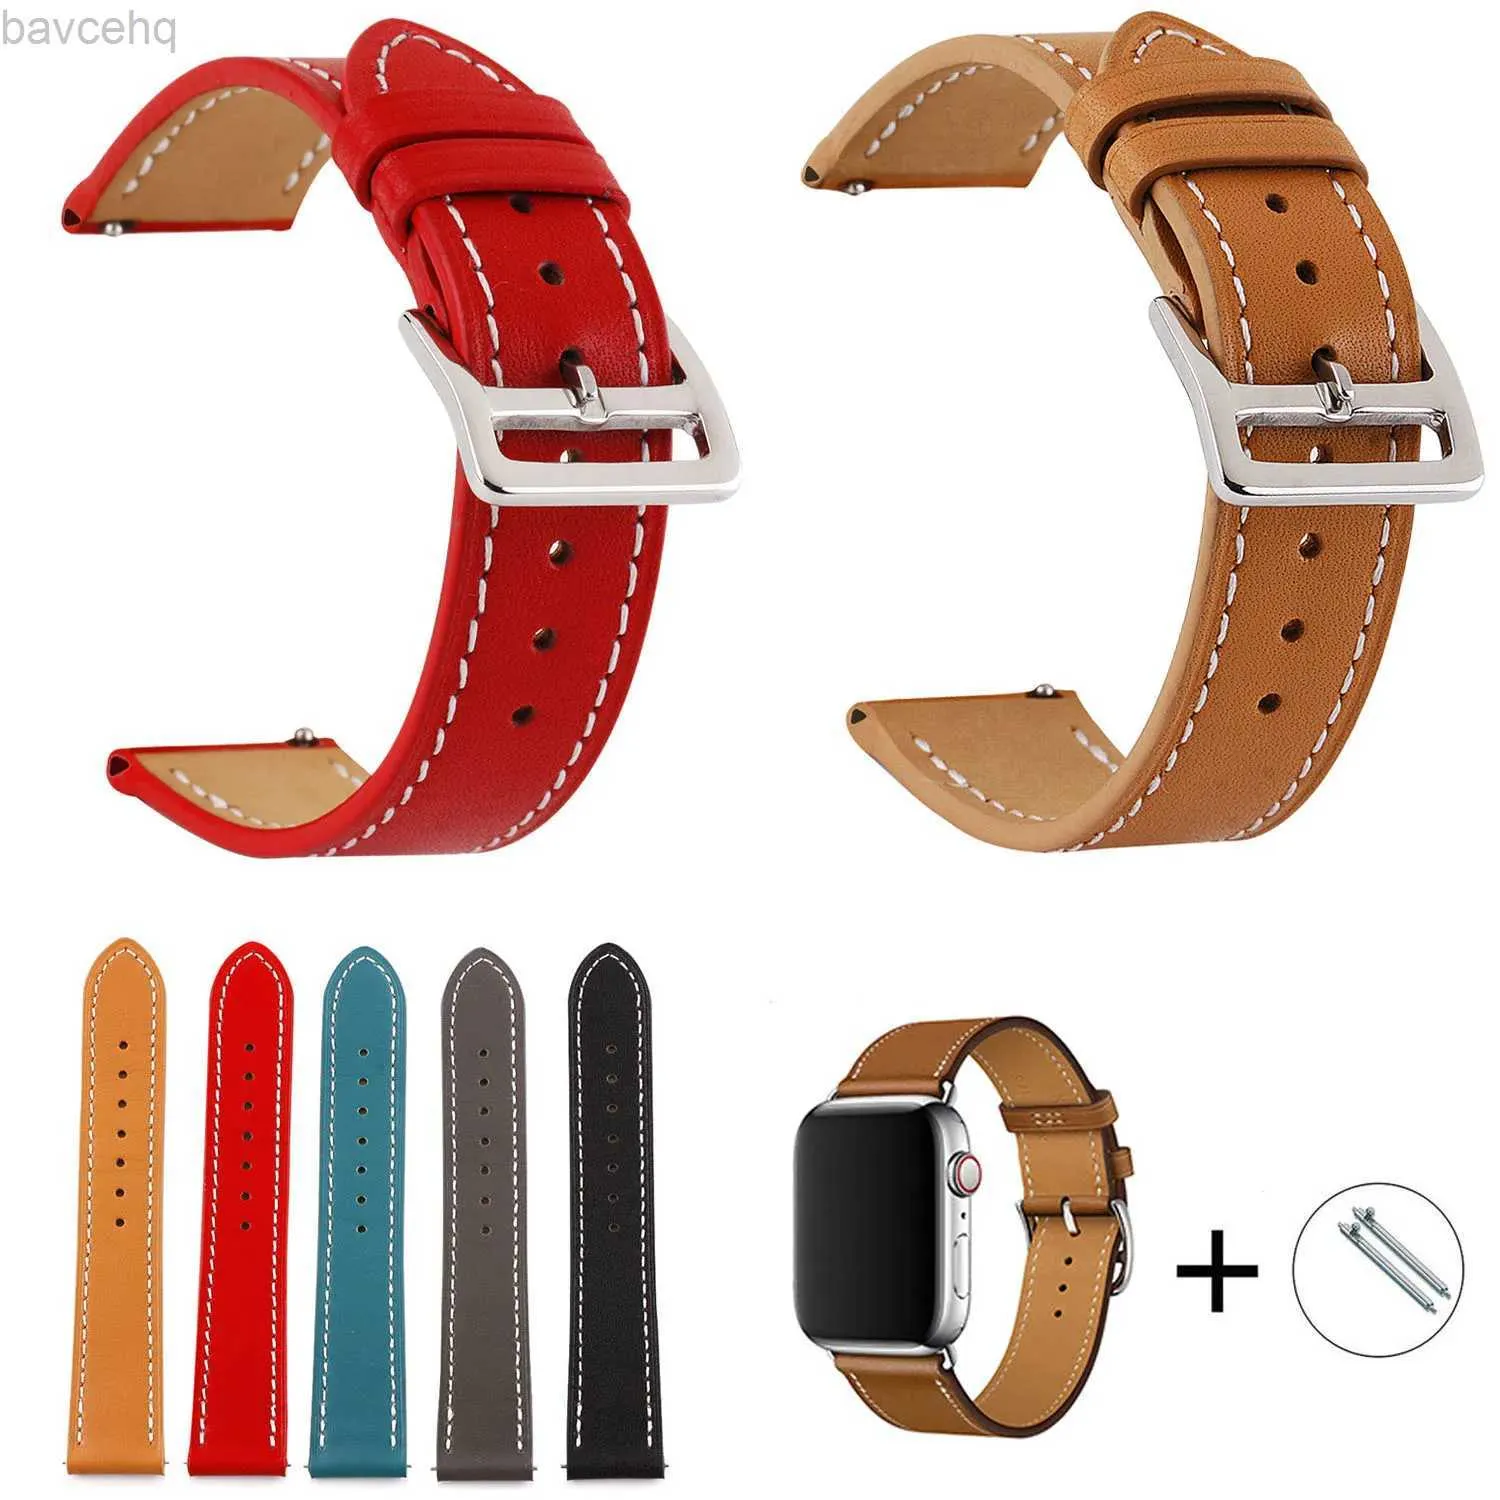 Watch Bands Watch straps genuine leather strap single tour watch strap wristband 18mm 20mm 22mm 24mm leather strap 24323